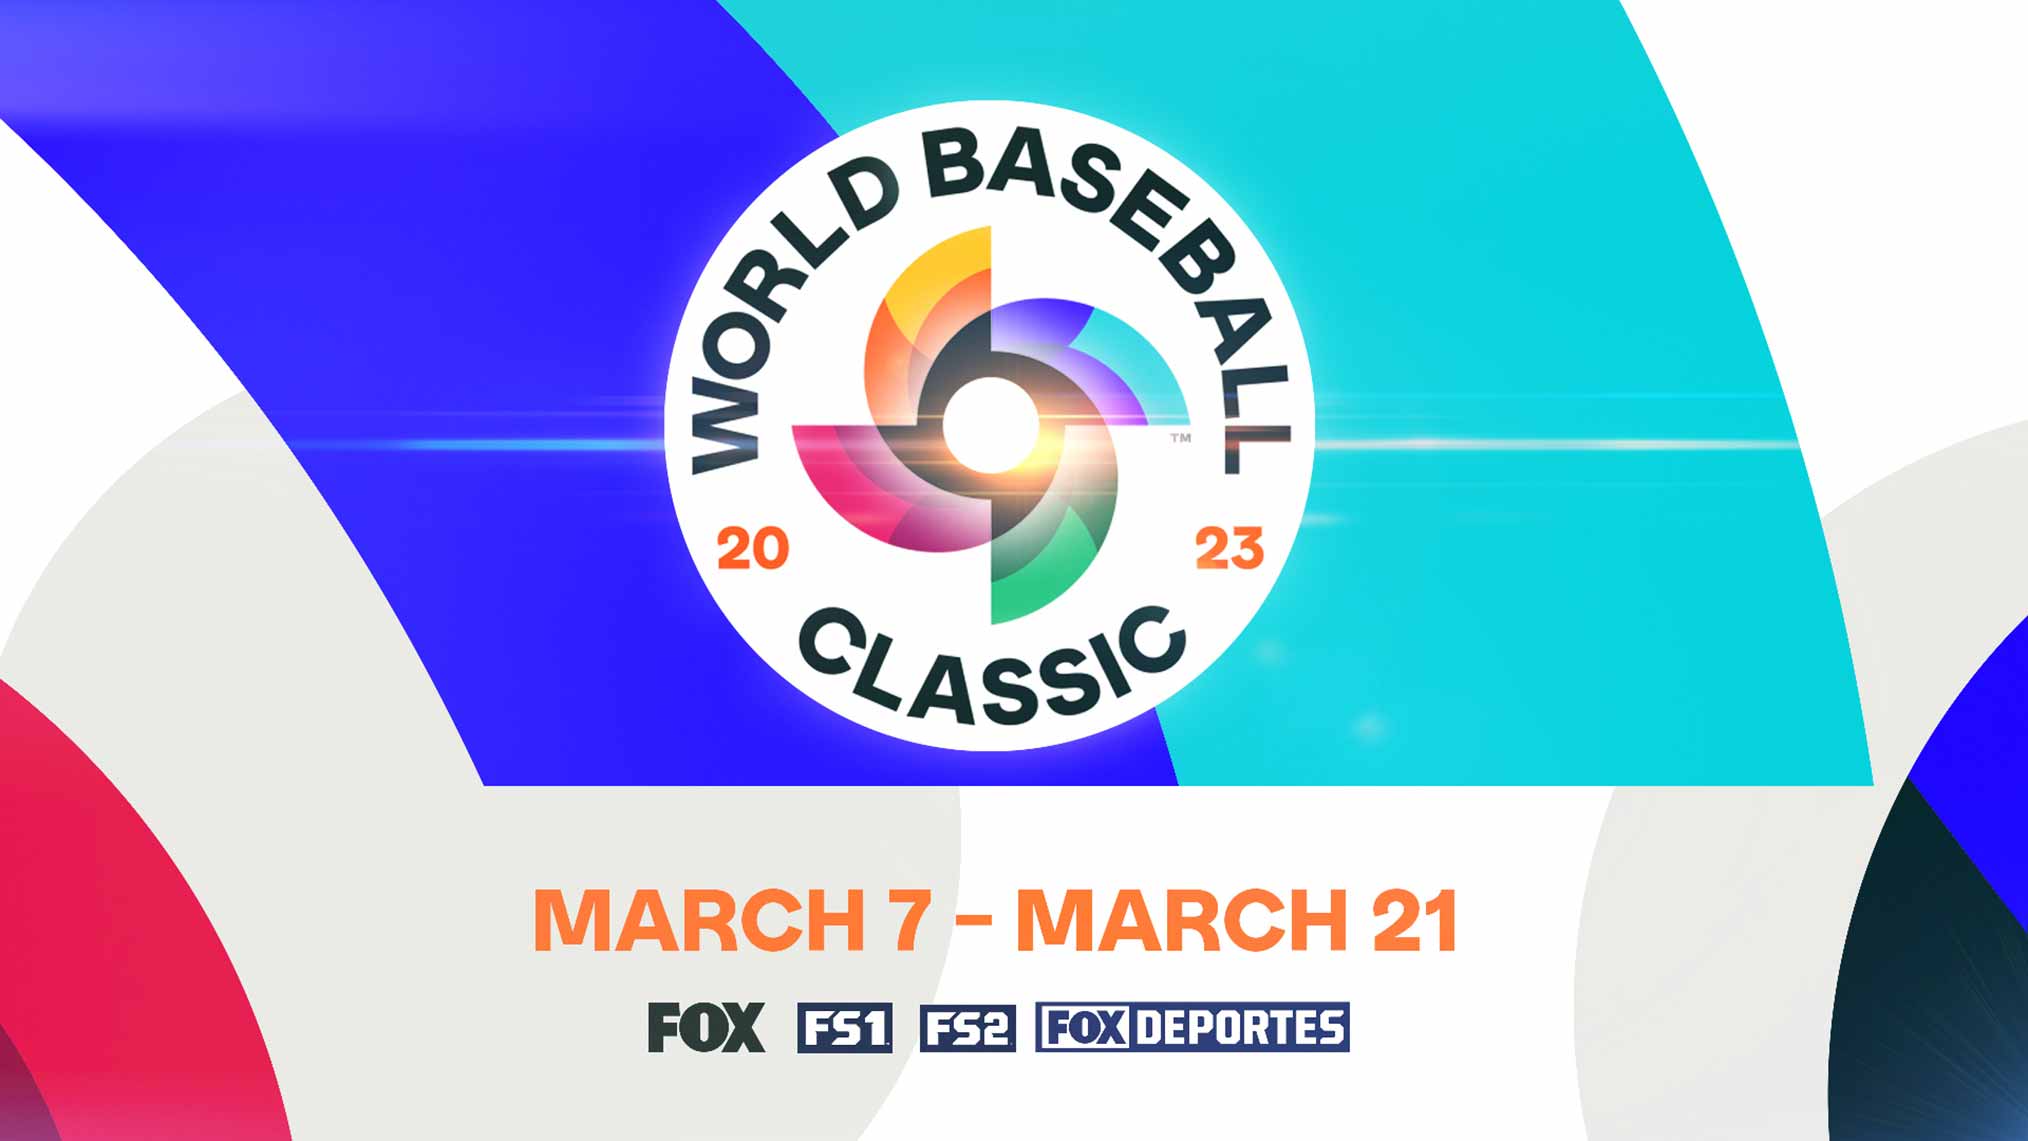 World Baseball Classic 2023 TV Schedule, Teams, Previews & US Roster